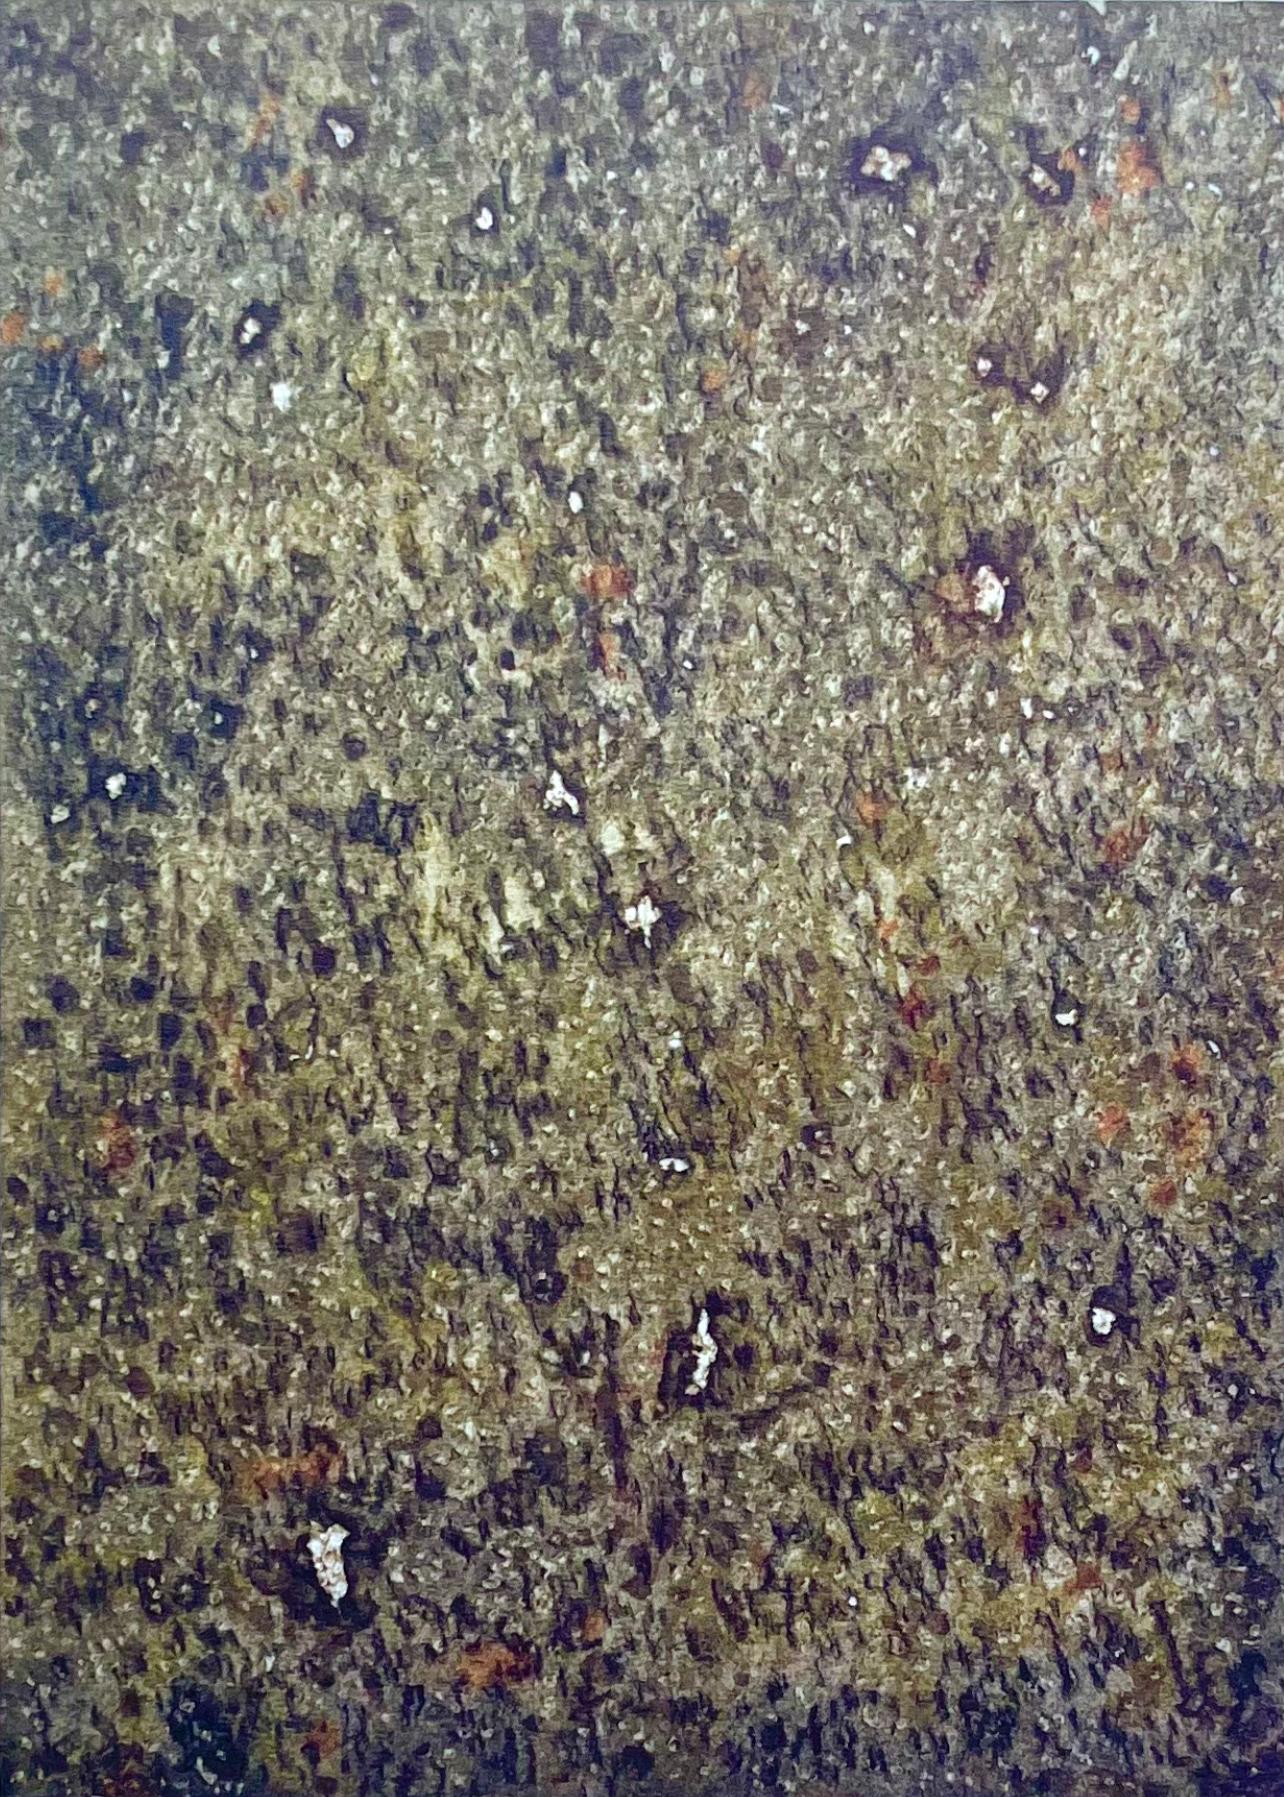 Lithograph on wove paper. Unsigned and unnumbered, as issued. Good Condition; never framed or matted. Notes: From the folio, Mark Tobey: Peintres d'aujourd'hui, 1961. Published by Fernand Hazan, Paris; lithographic plates produced by Clichés Union,